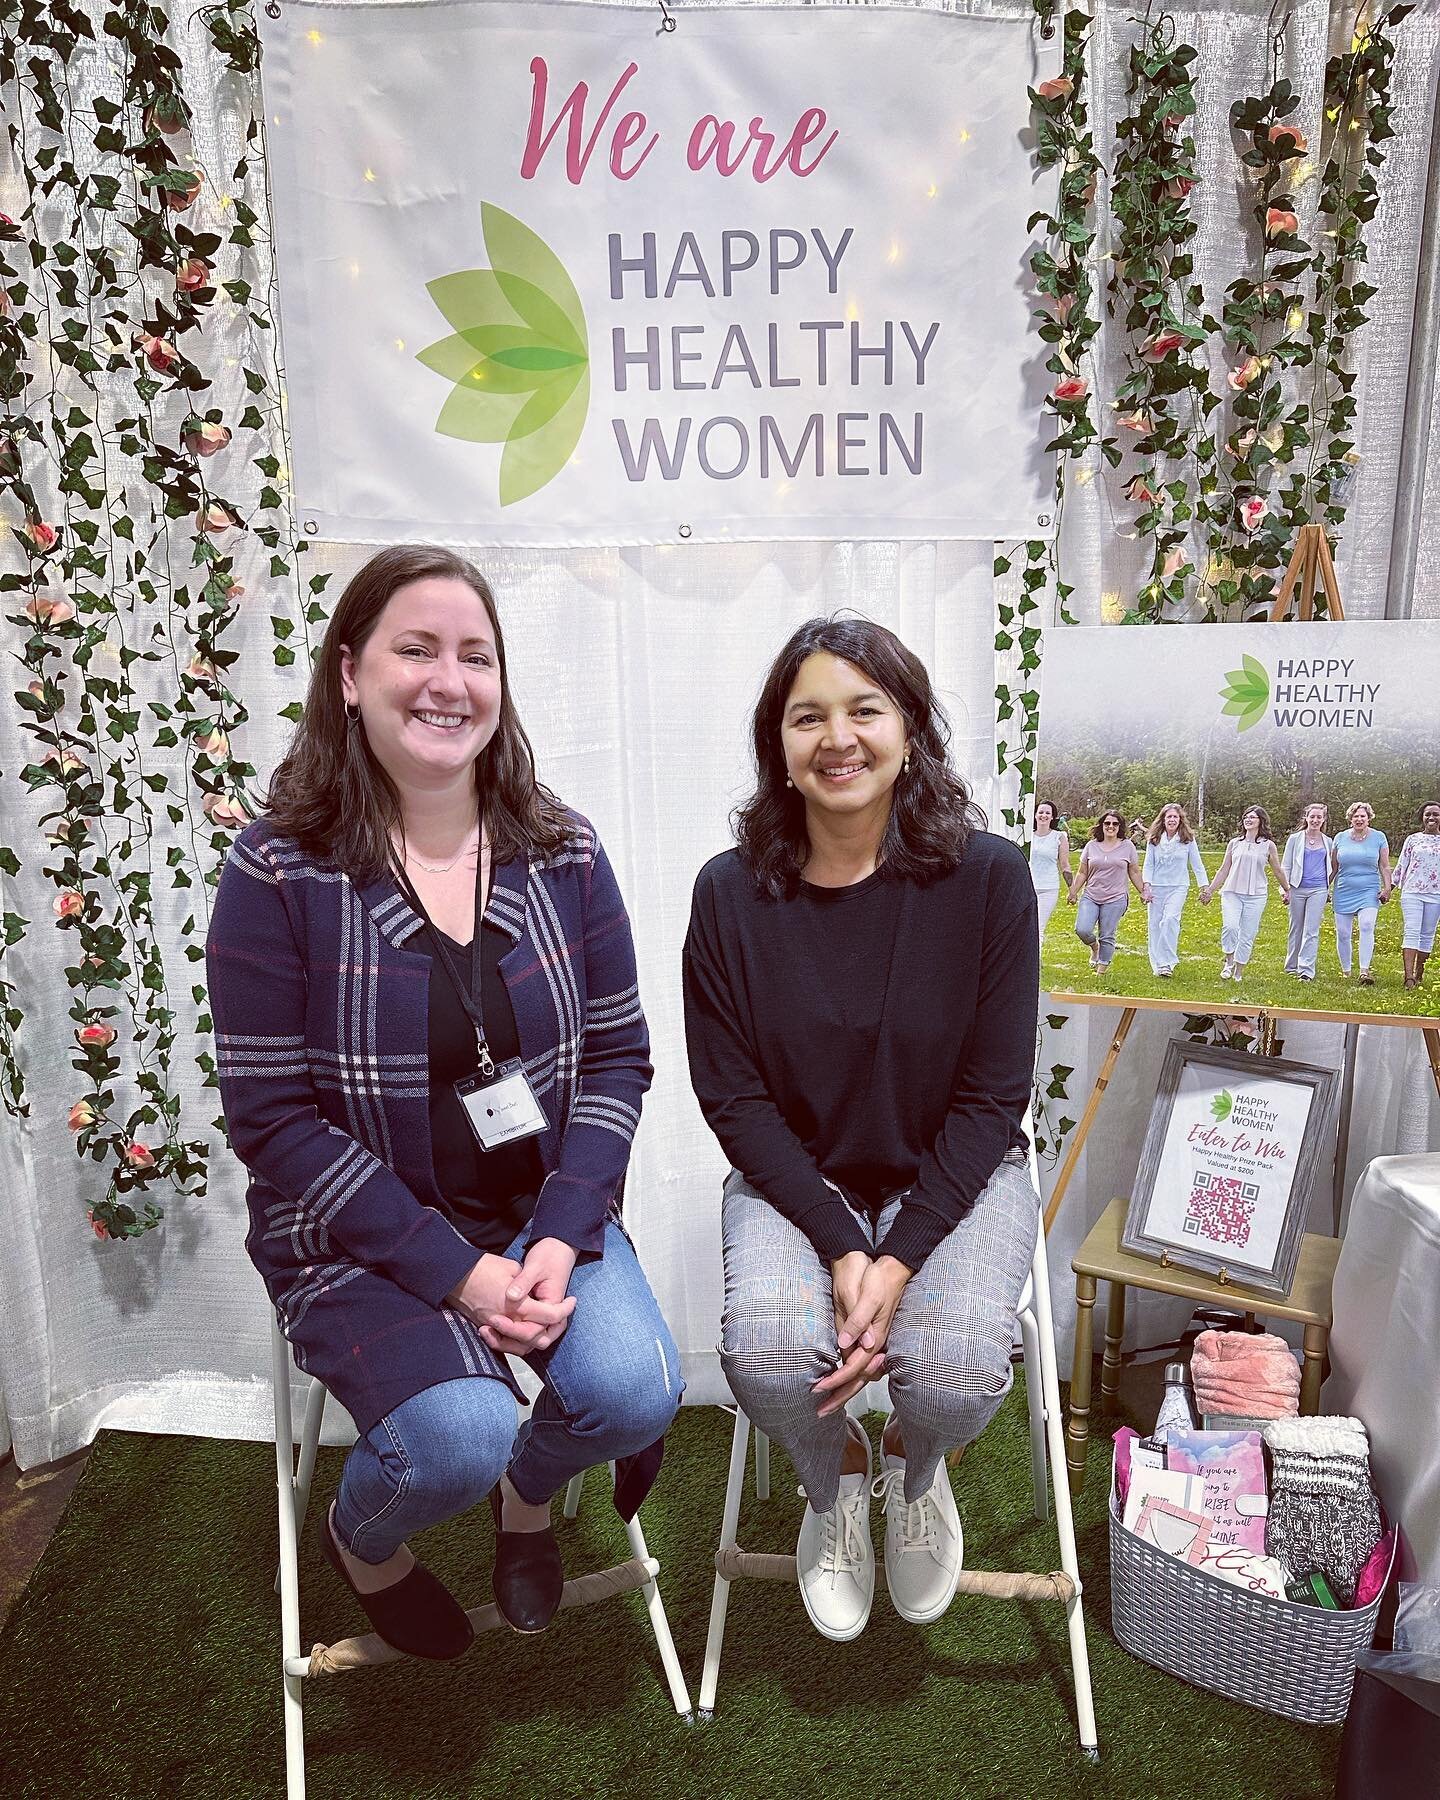 The All About Women Show is on and  it&rsquo;s inspirational  and a whole lot of fun. I met up with the lovely Chef Jenny @mysweetbeet and Natalie @happyhealthywomen. Both are holding draws for fabulous prizes so be sure to stop by and see them!